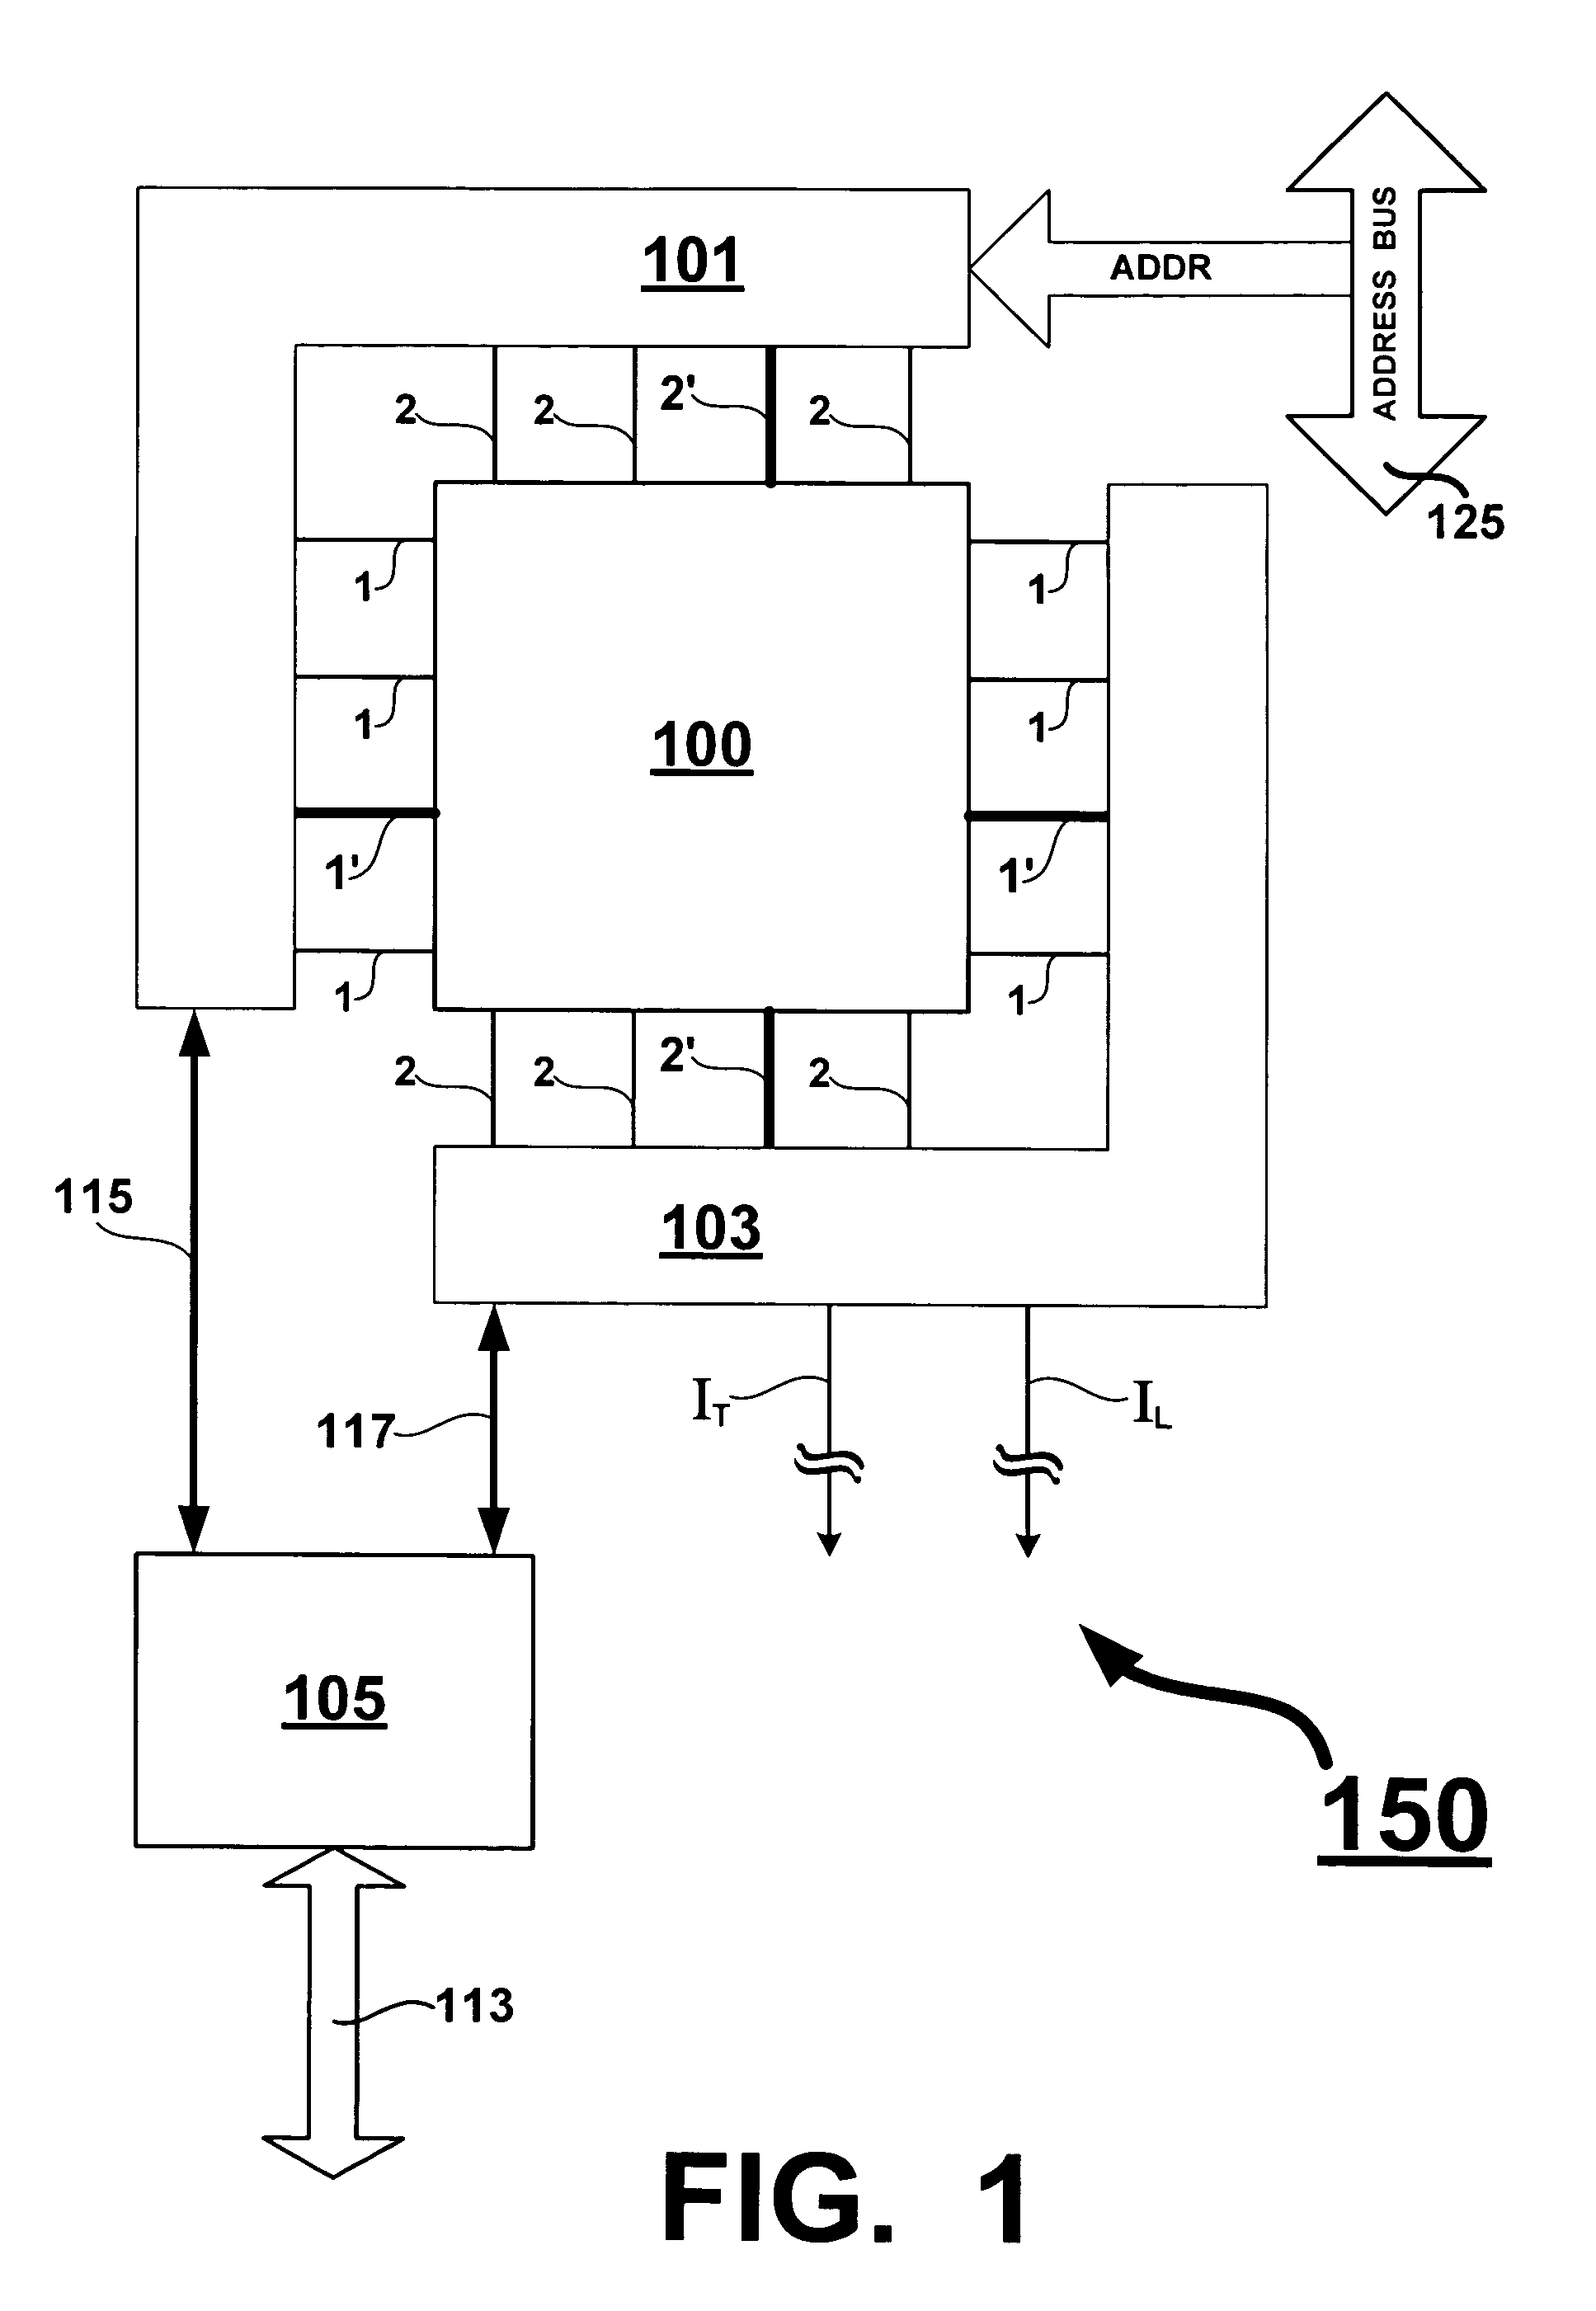 Two-cycle sensing in a two-terminal memory array having leakage current